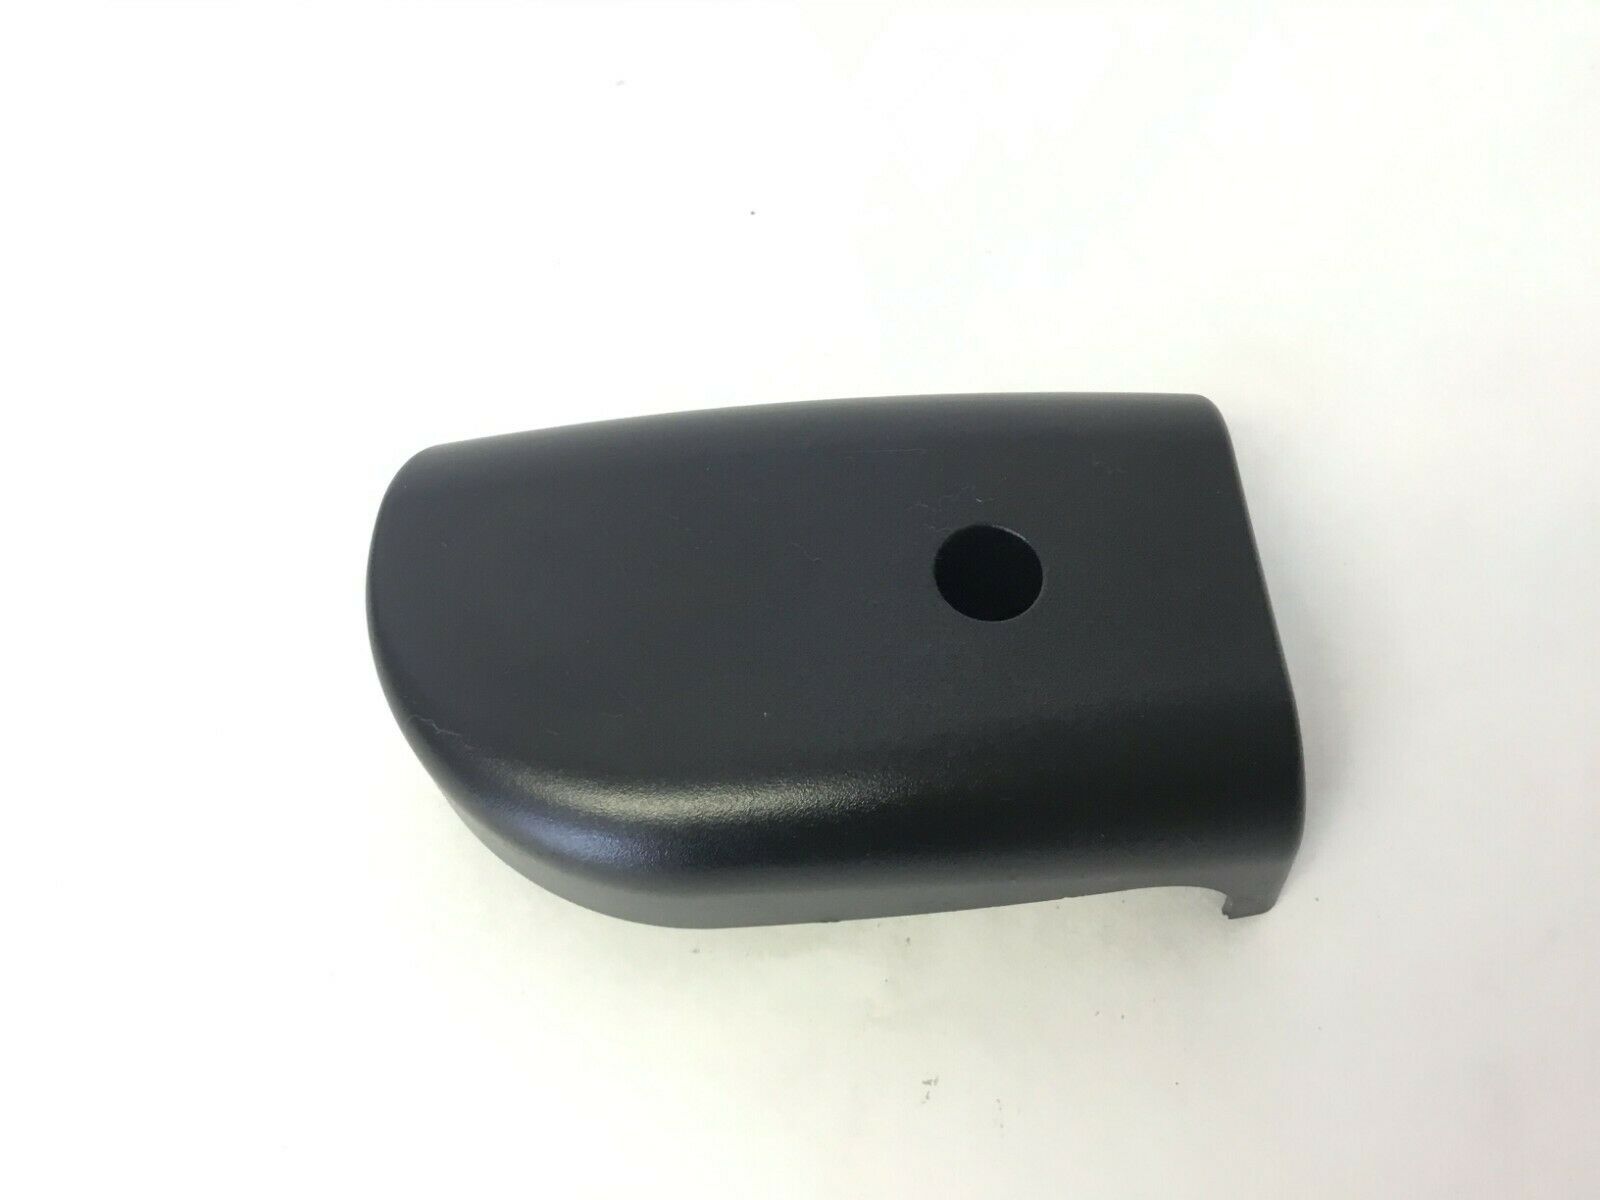 True Fitness Z5.1 Elliptical Pivot Arm Outer Cover (Used)